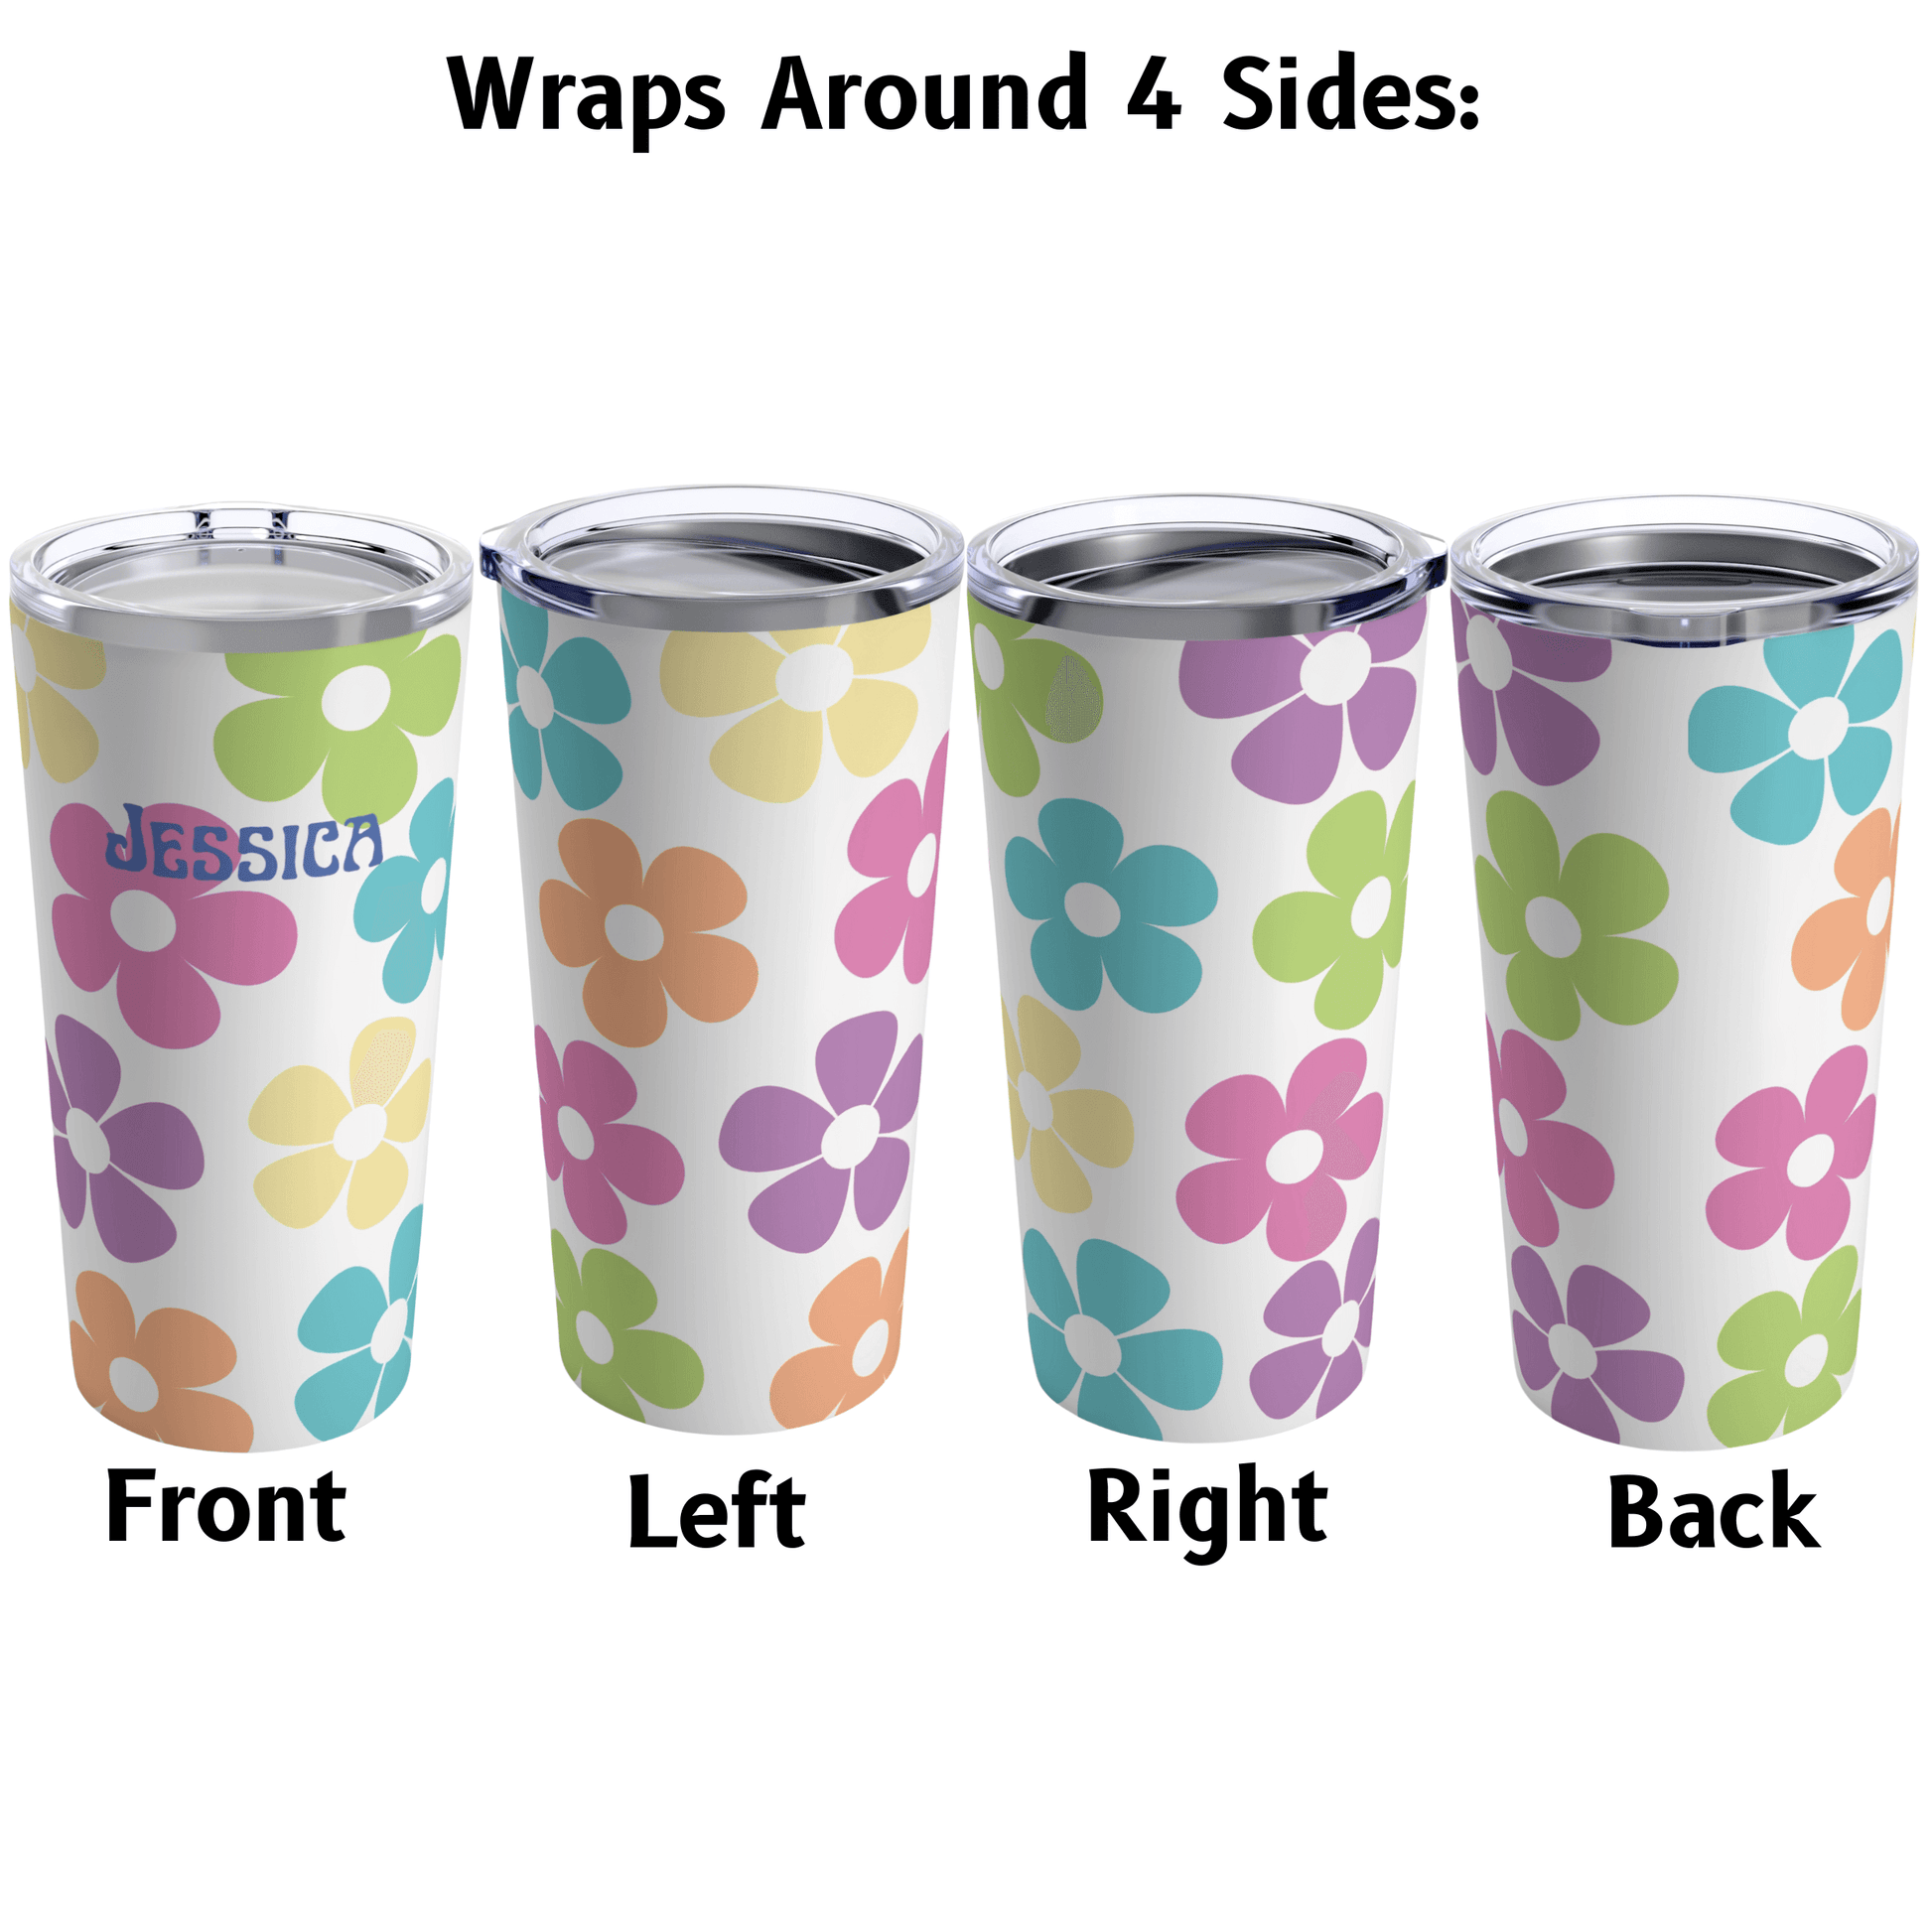 All four sides of the personalized tumbler showing the name on the front and flowers on all other sides.